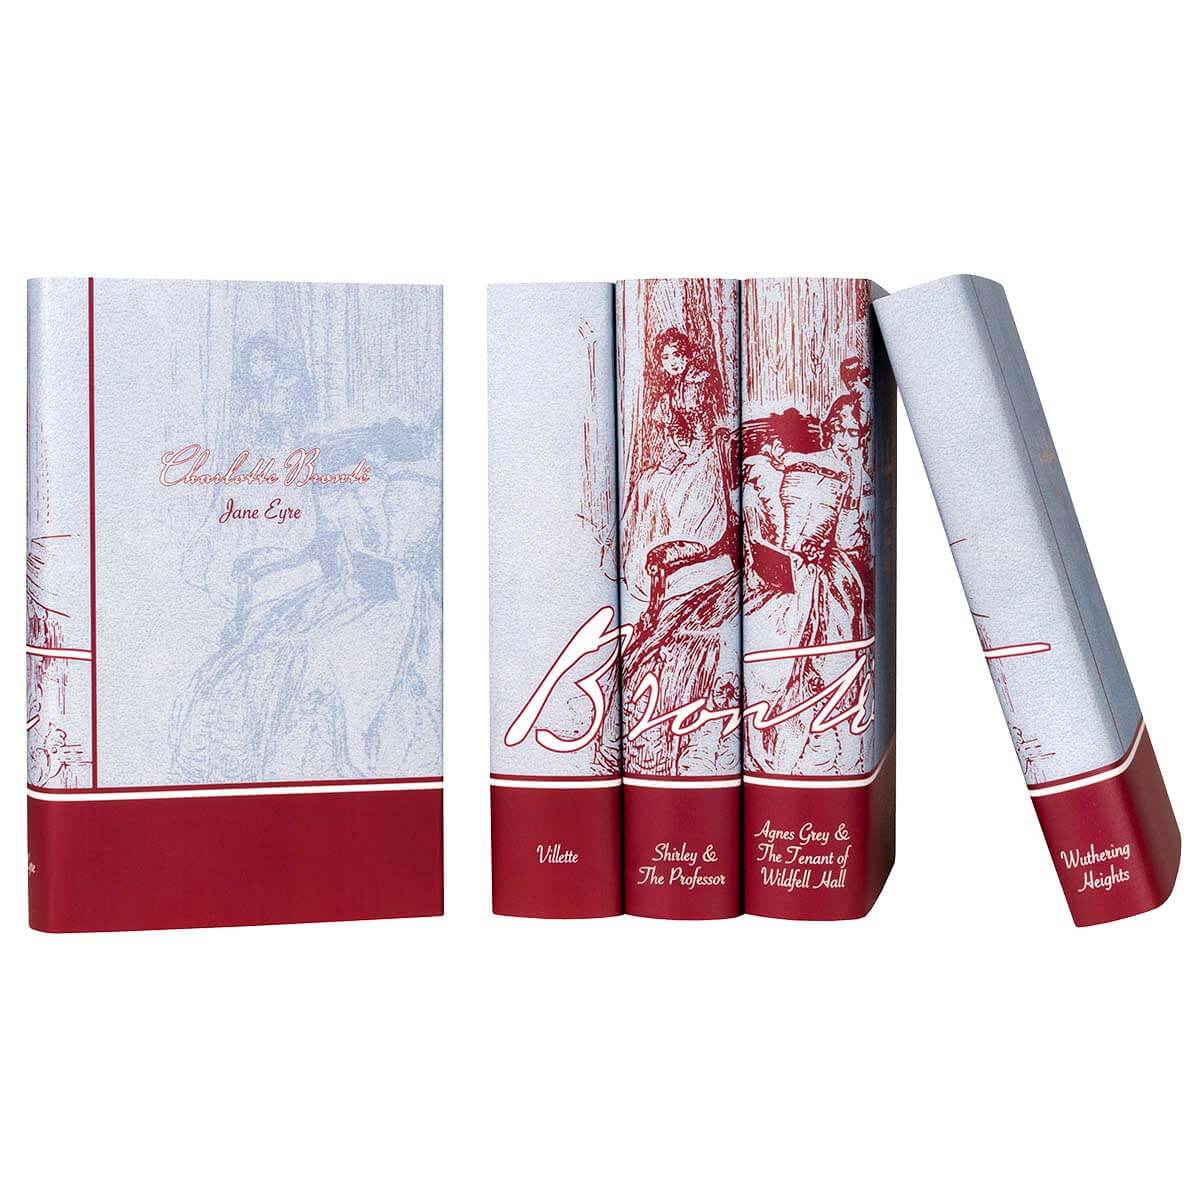 Classic Bronte Sisters Book Set, Curated Collections from JuniperCustom enhance your library and make great gifts!